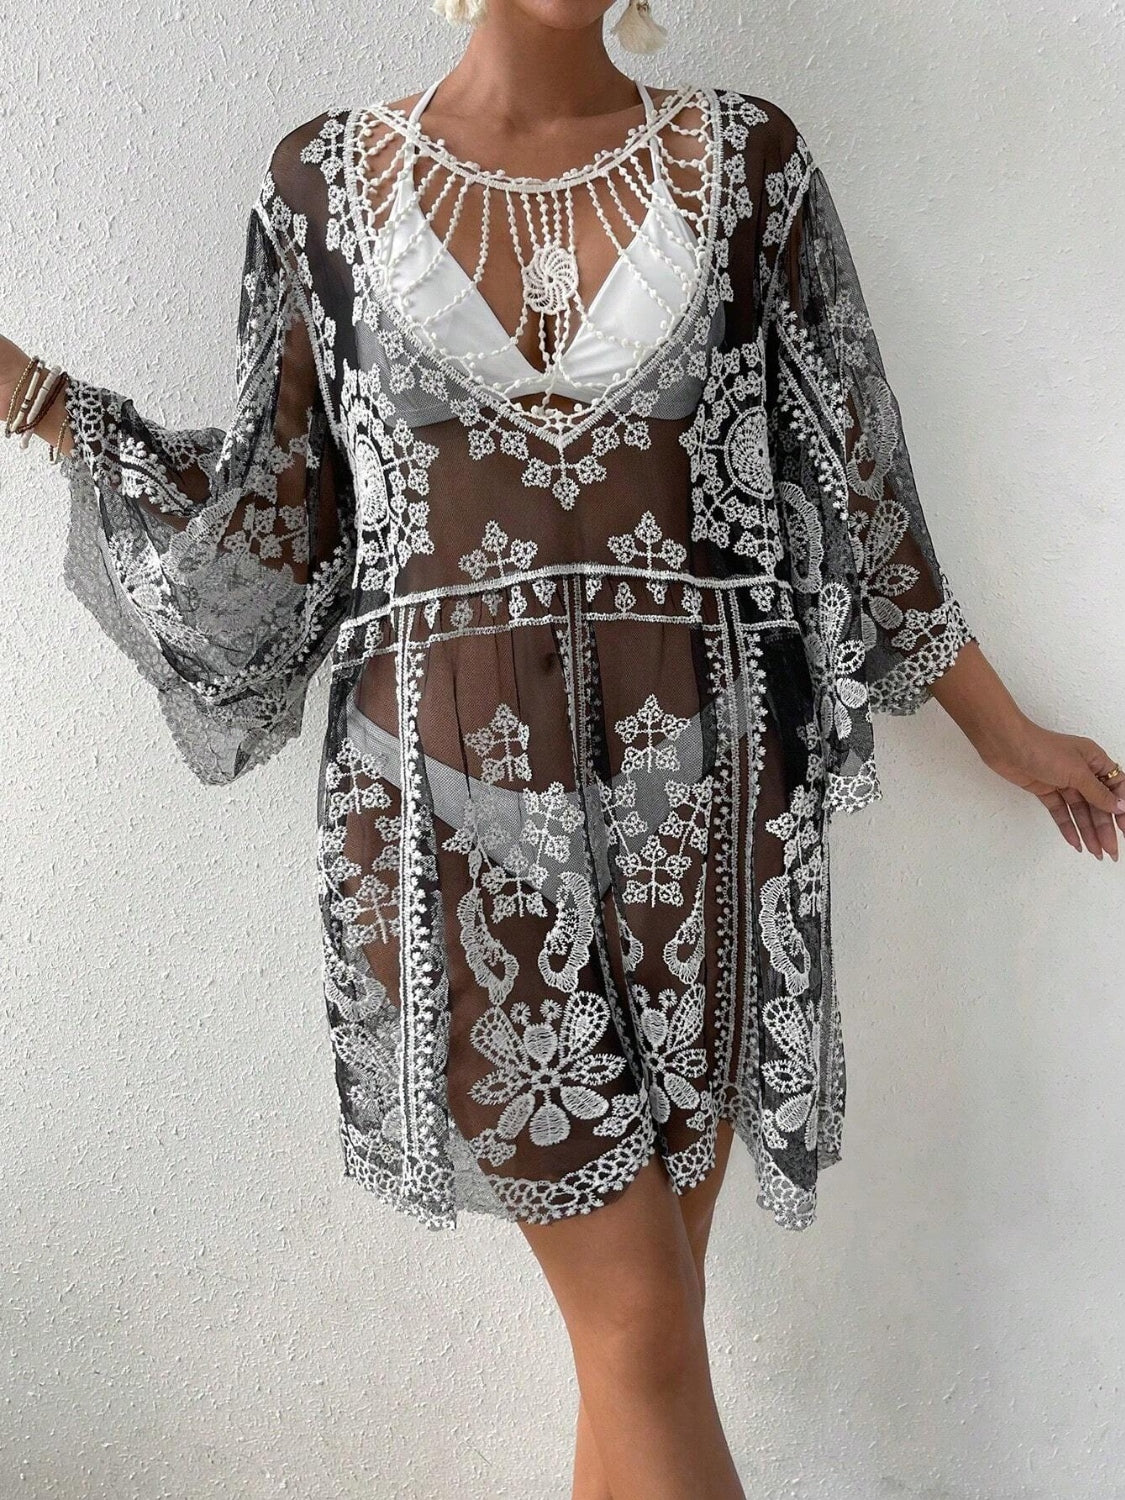 Sunset Vacation  Lace Round Neck Beach Cover Up Sunset and Swim   